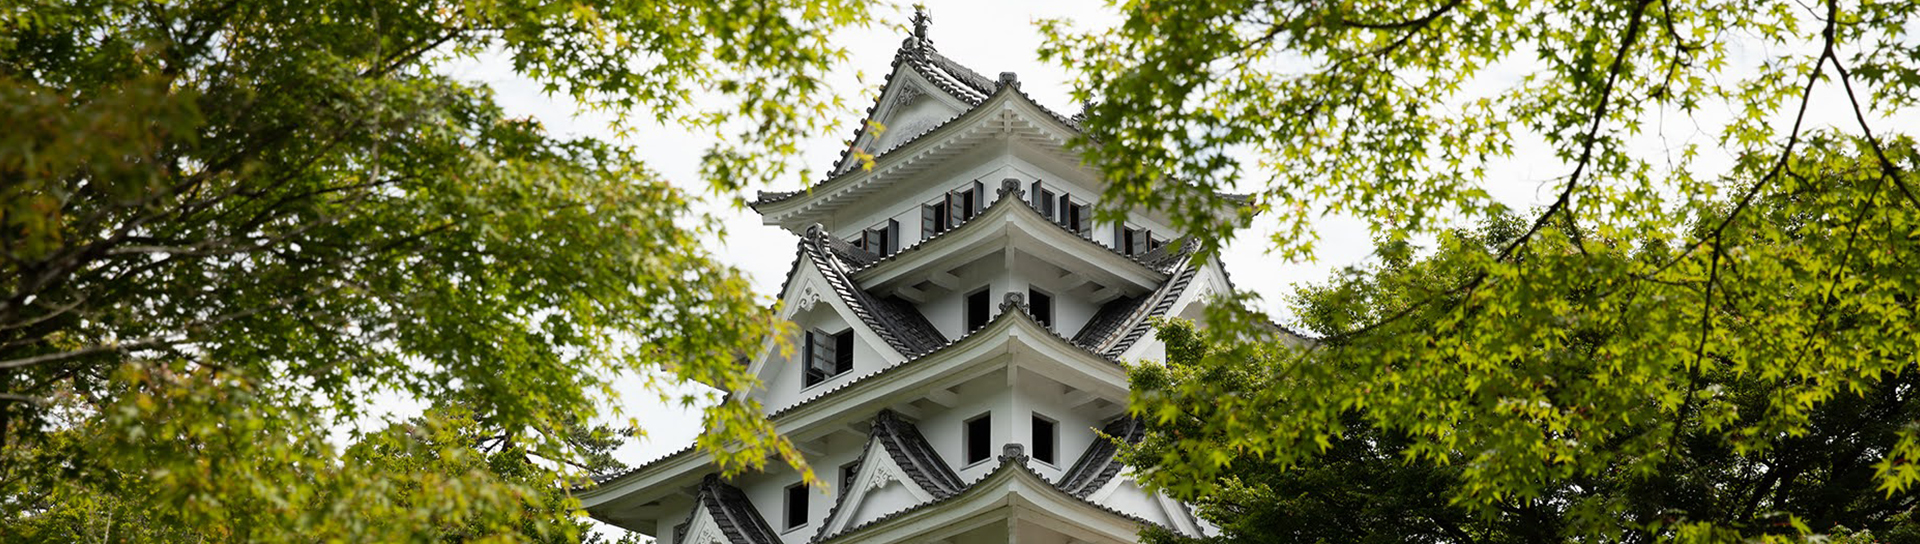 traditional white japanese building surrounded by trees